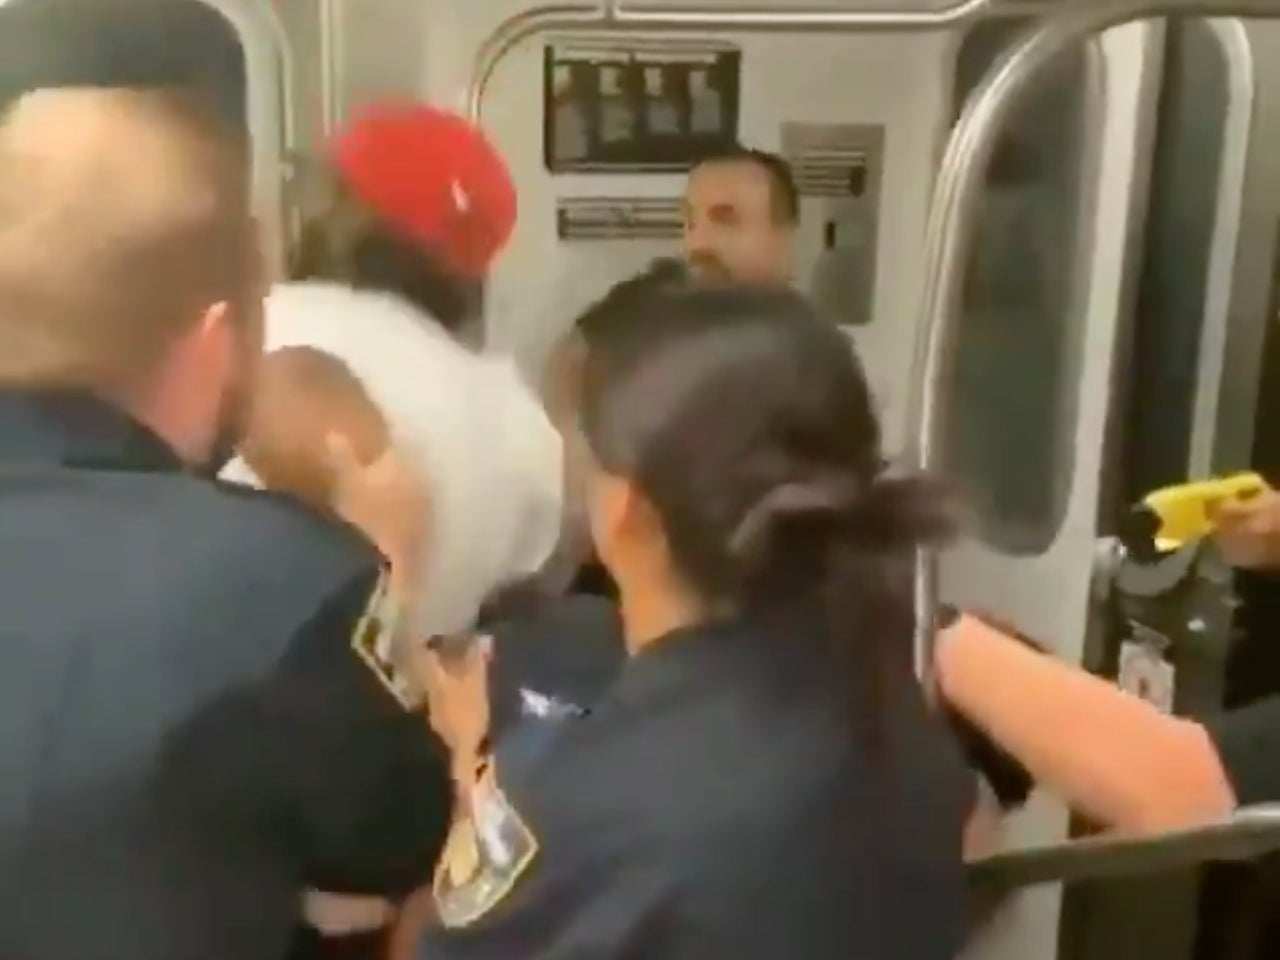 NYPD officers were filmed using a stun gun on a Black man who allegedly had held open a subway gate for a fellow passenger, allowing them to avoid paying the fare.